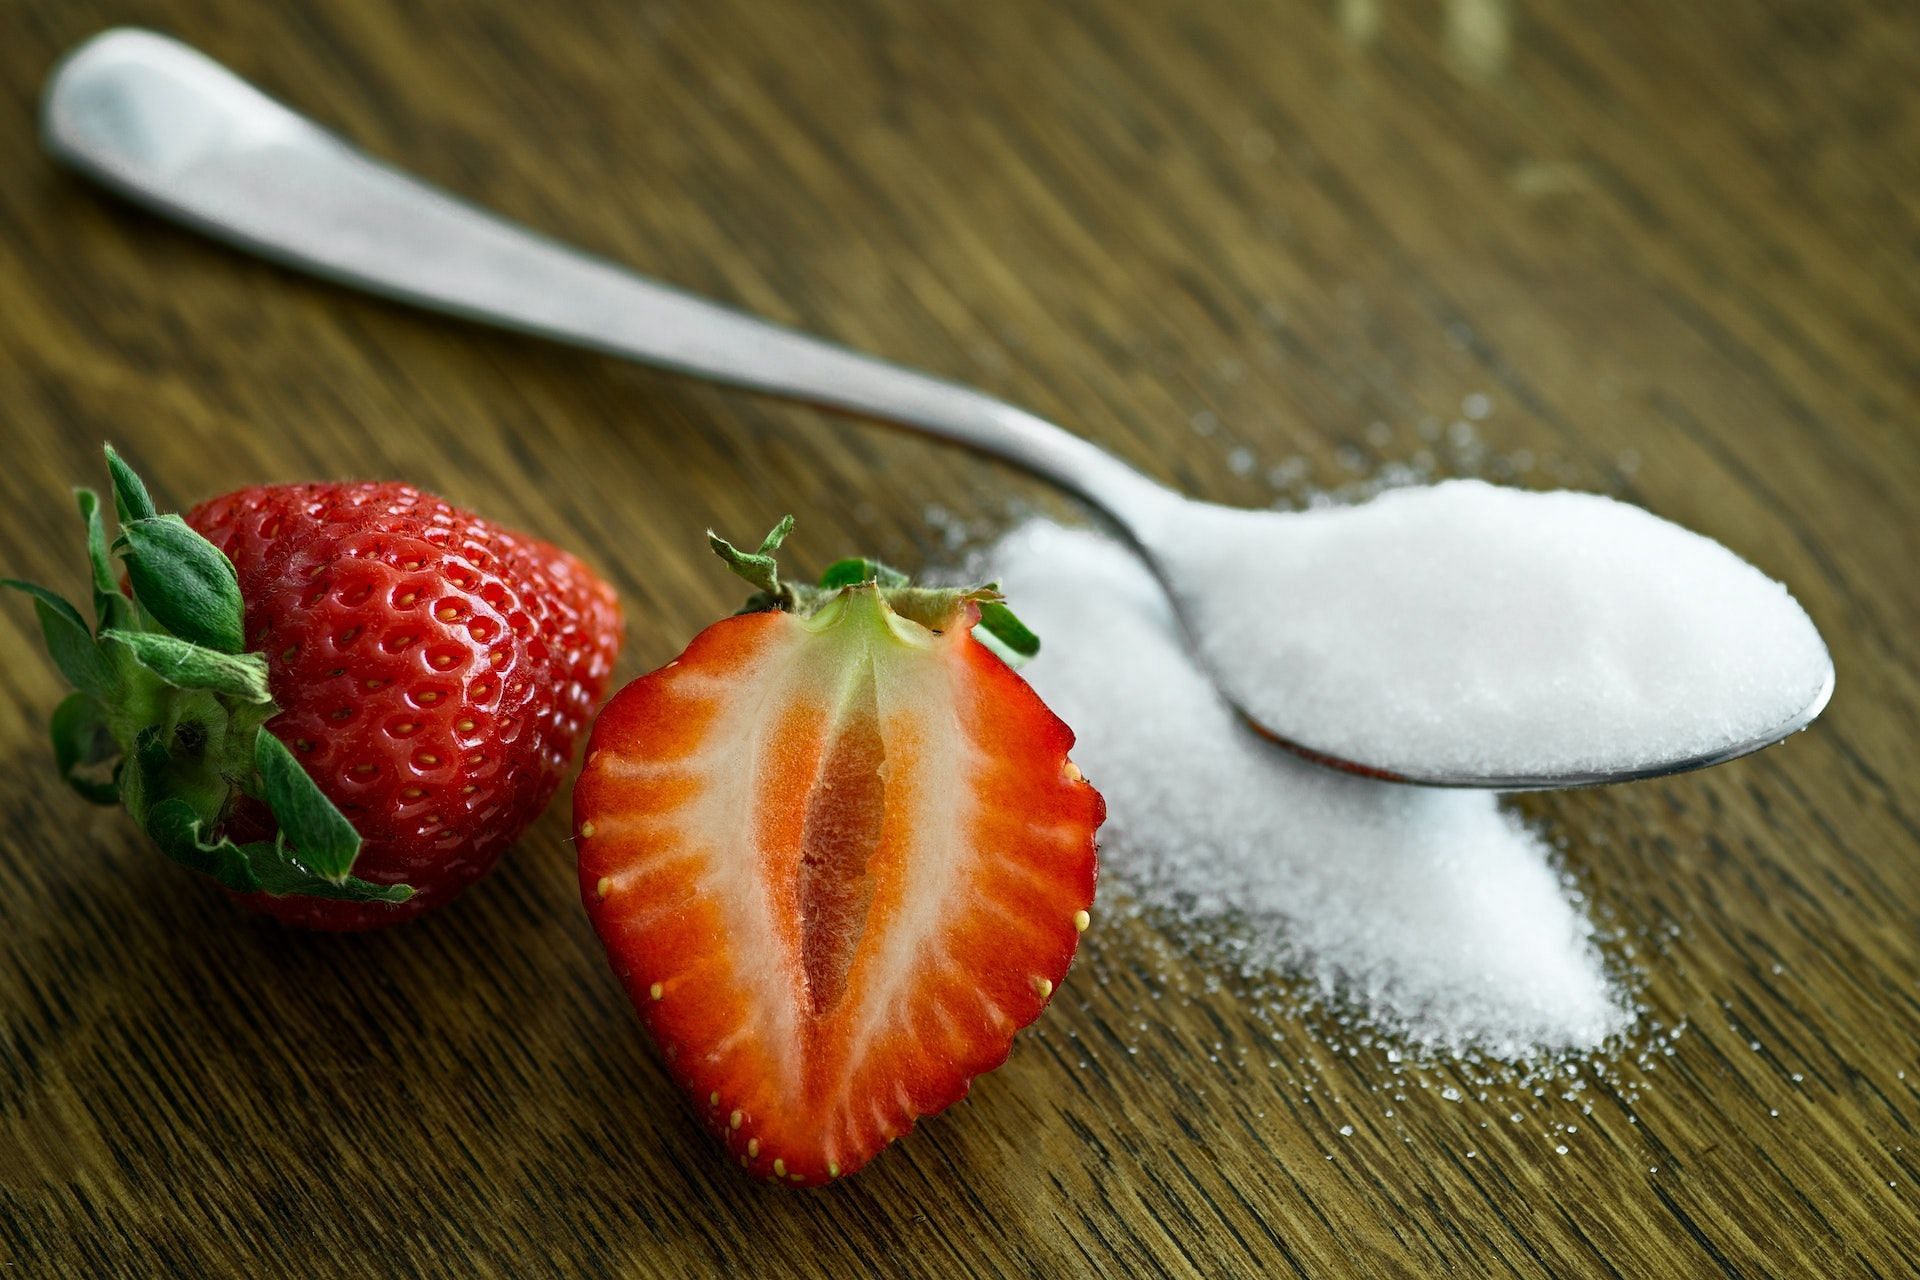 Eating sugar can stop hiccups. (Photo via Pexels/mali maeder)